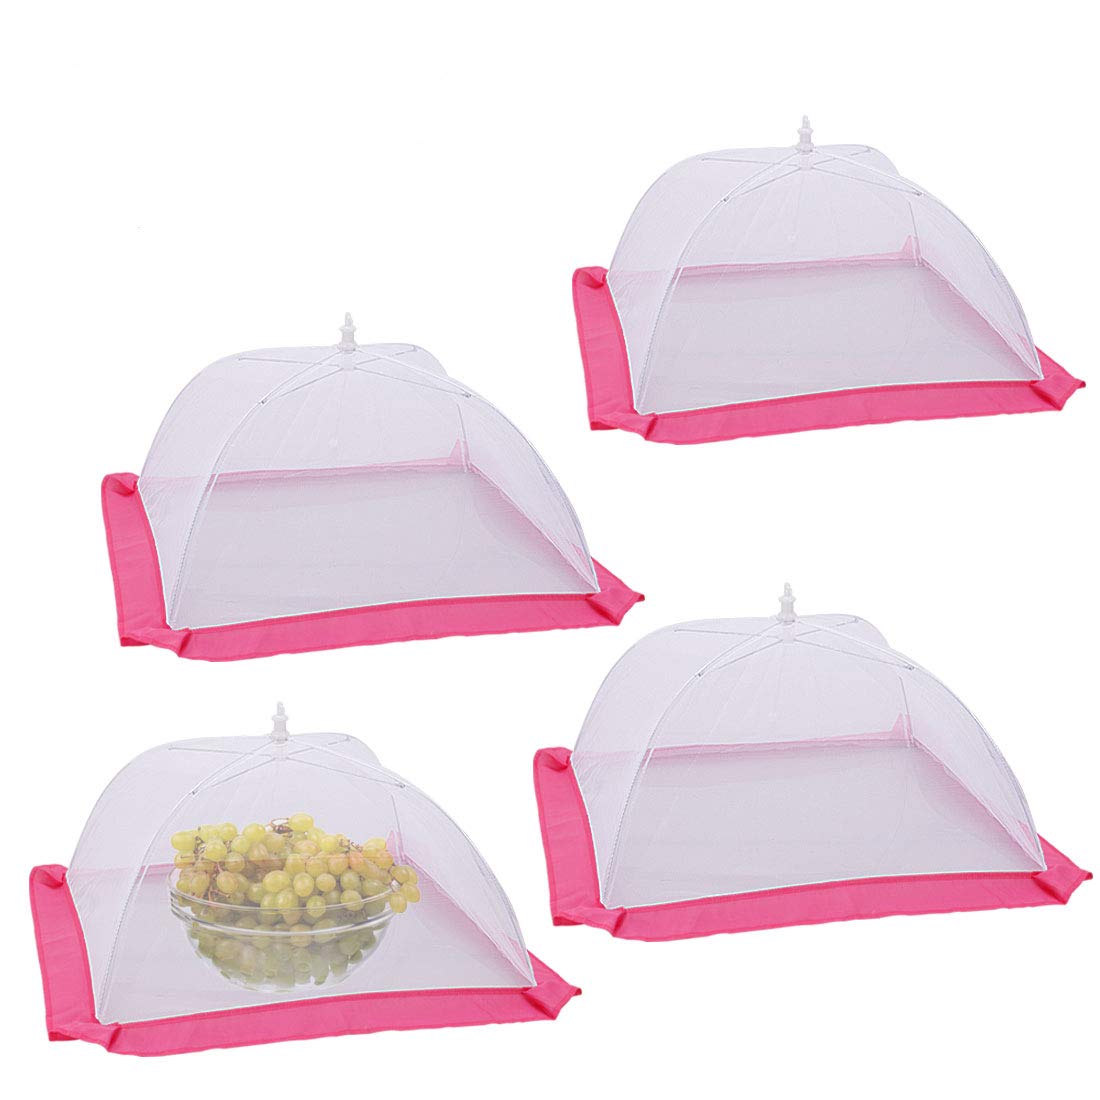 Mesh Food Cover Tents, 4 Pack 17 Inch Pop-up Screen Food Tents Umbrella for Outdoors, Protect Your Food and Fruit at Picnics, BBQ and More